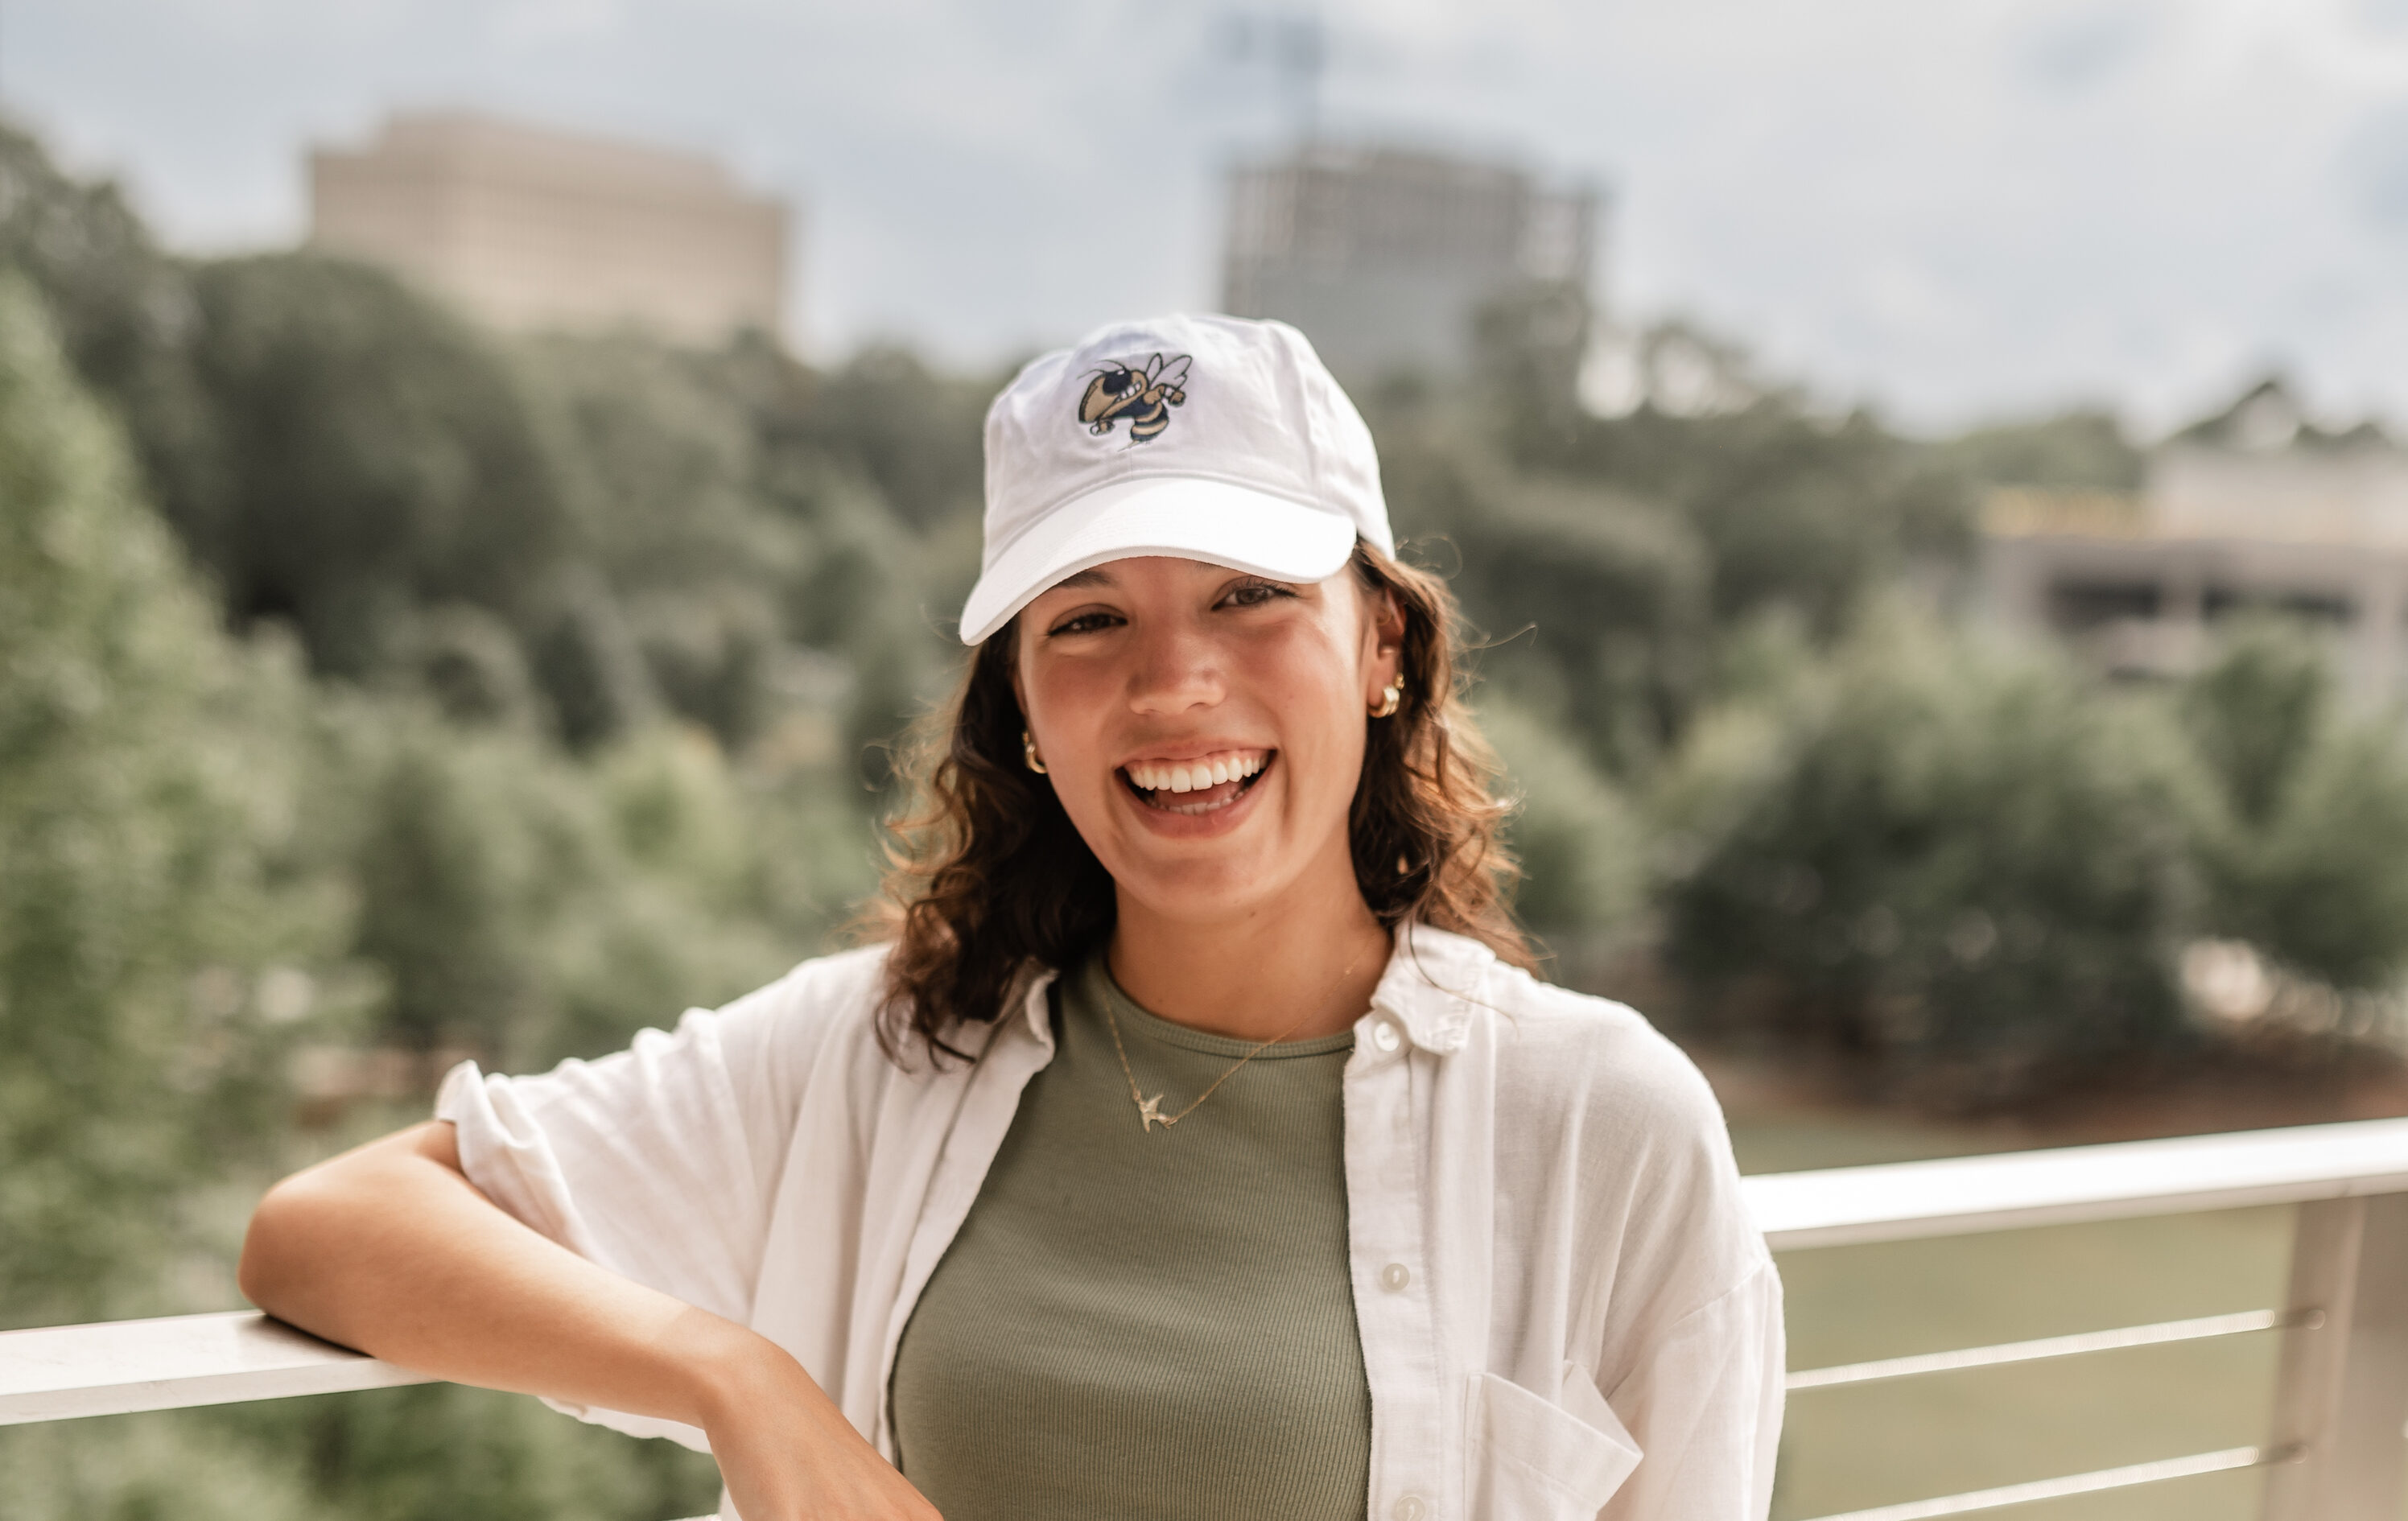 Georgia Tech student at the CULC rooftop